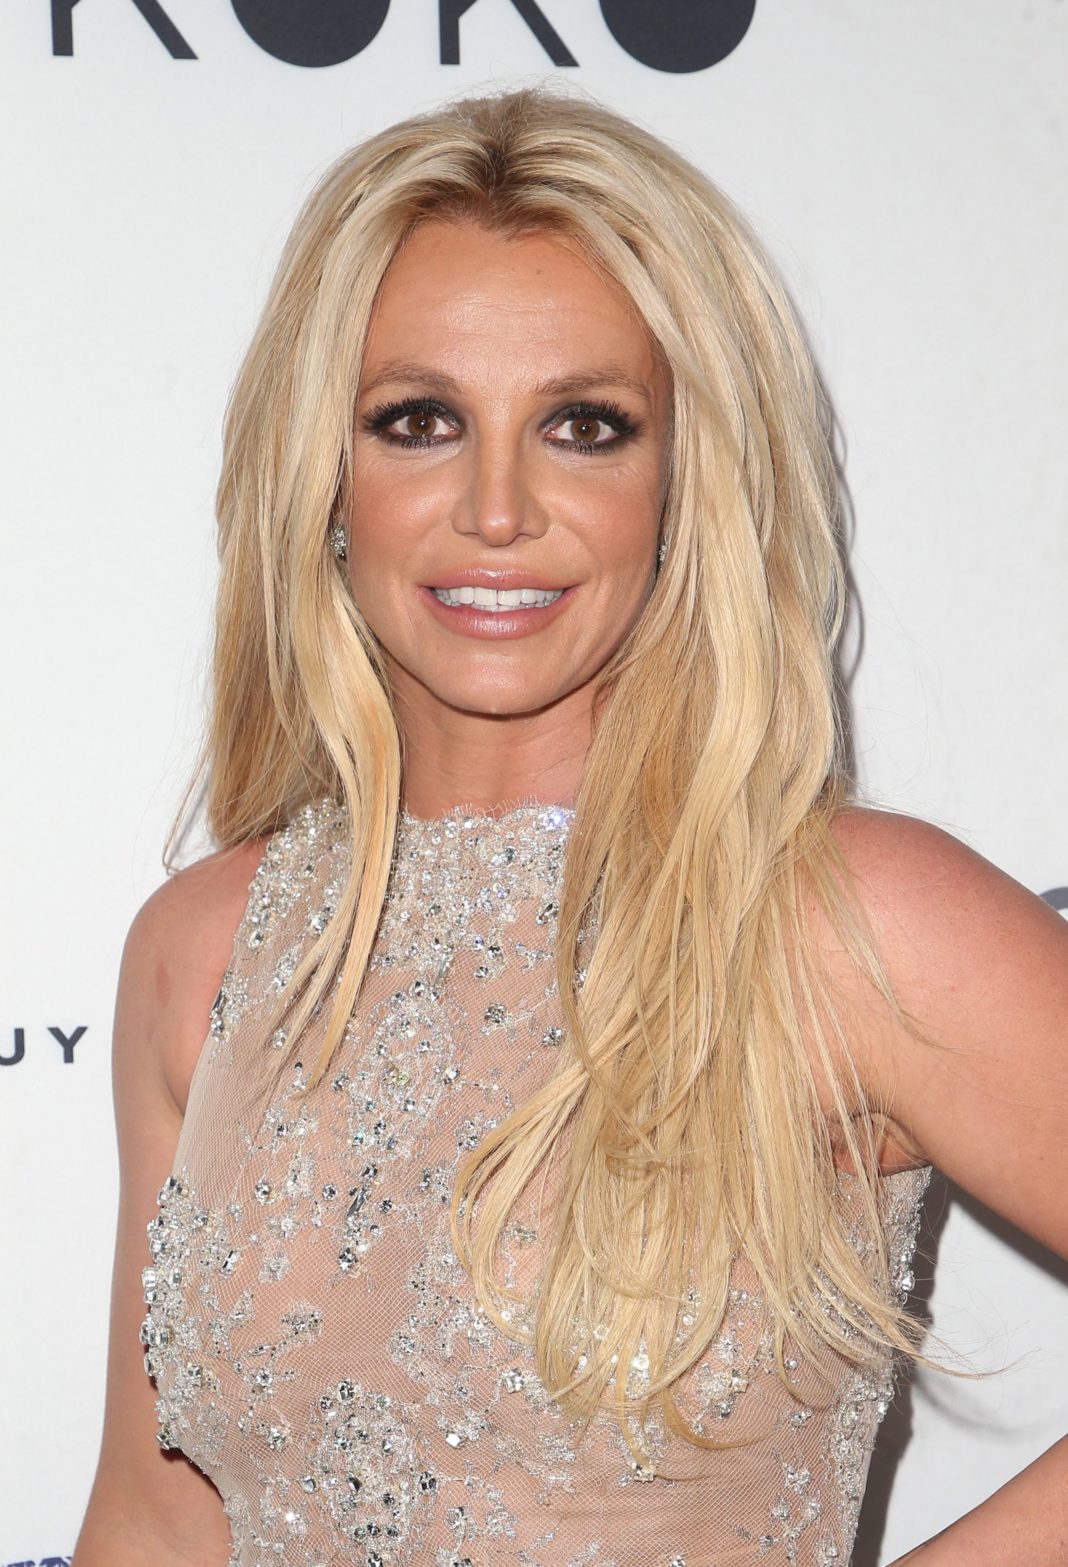 Britney Spears is the New Face of Kenzo